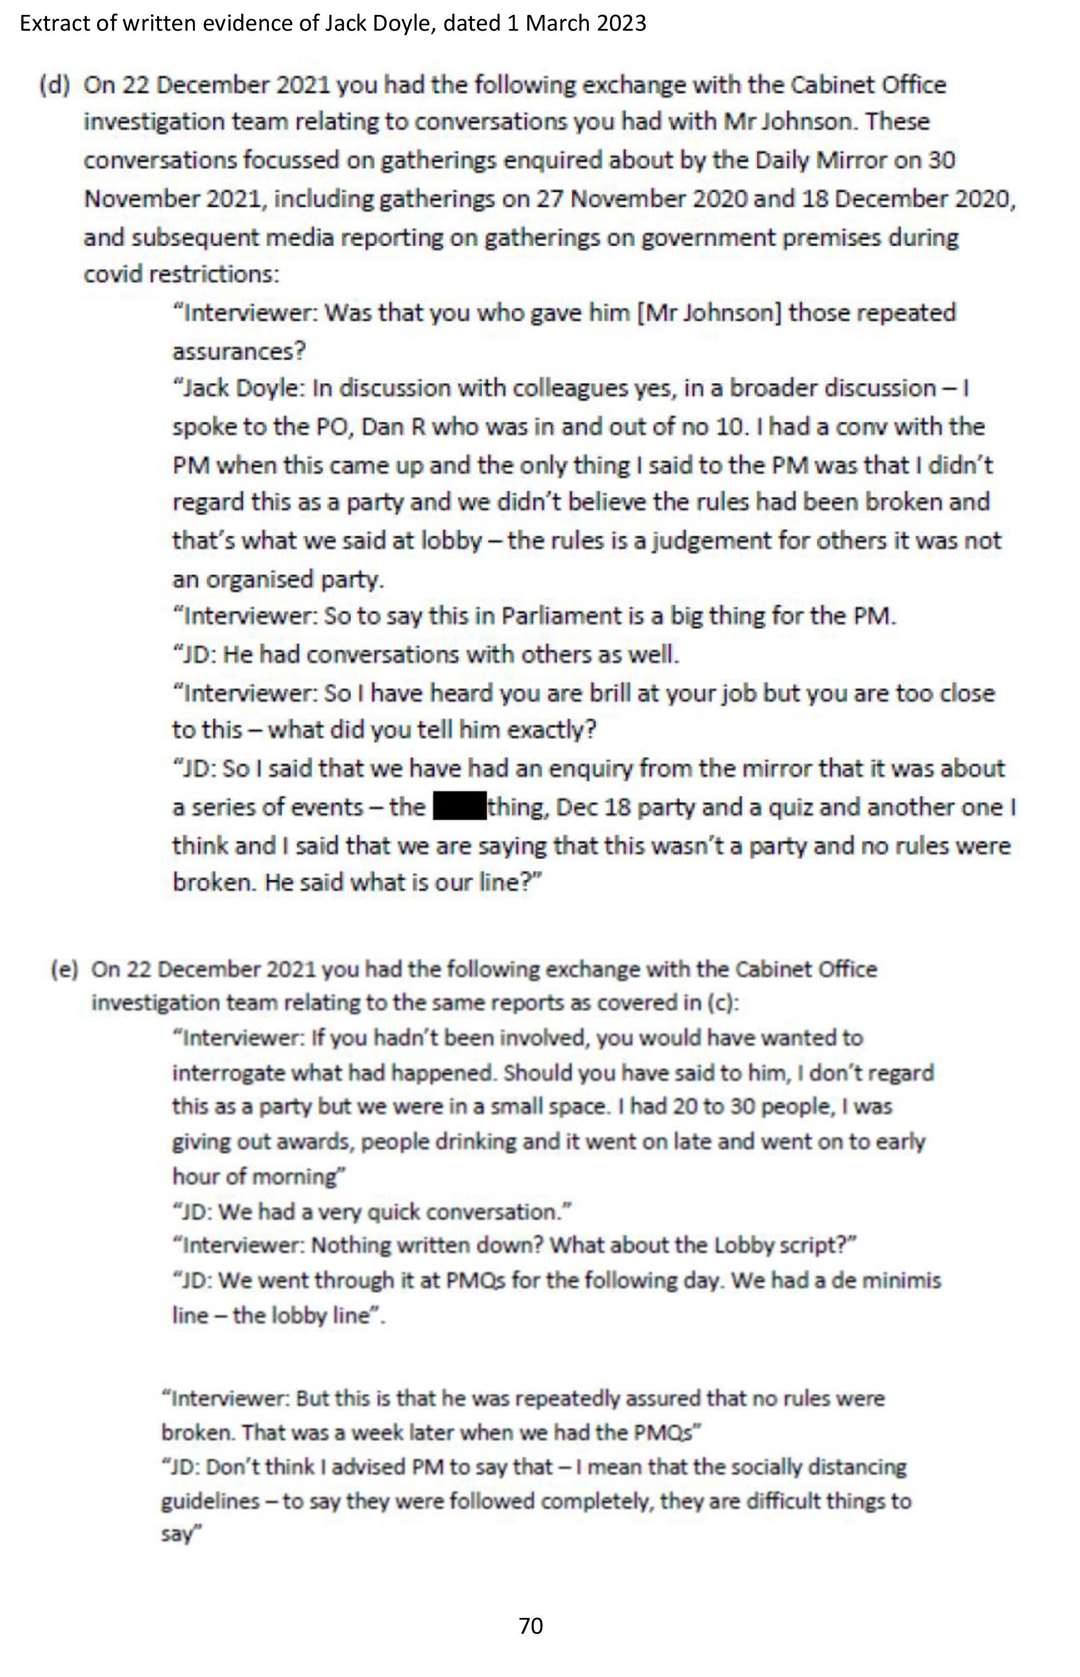 Written evidence of Jack Doyle, released as part of the Commons Privileges Committee inquiry into claims that Boris Johnson knowingly misled Parliament over parties at No 10 (House of Commons/PA)